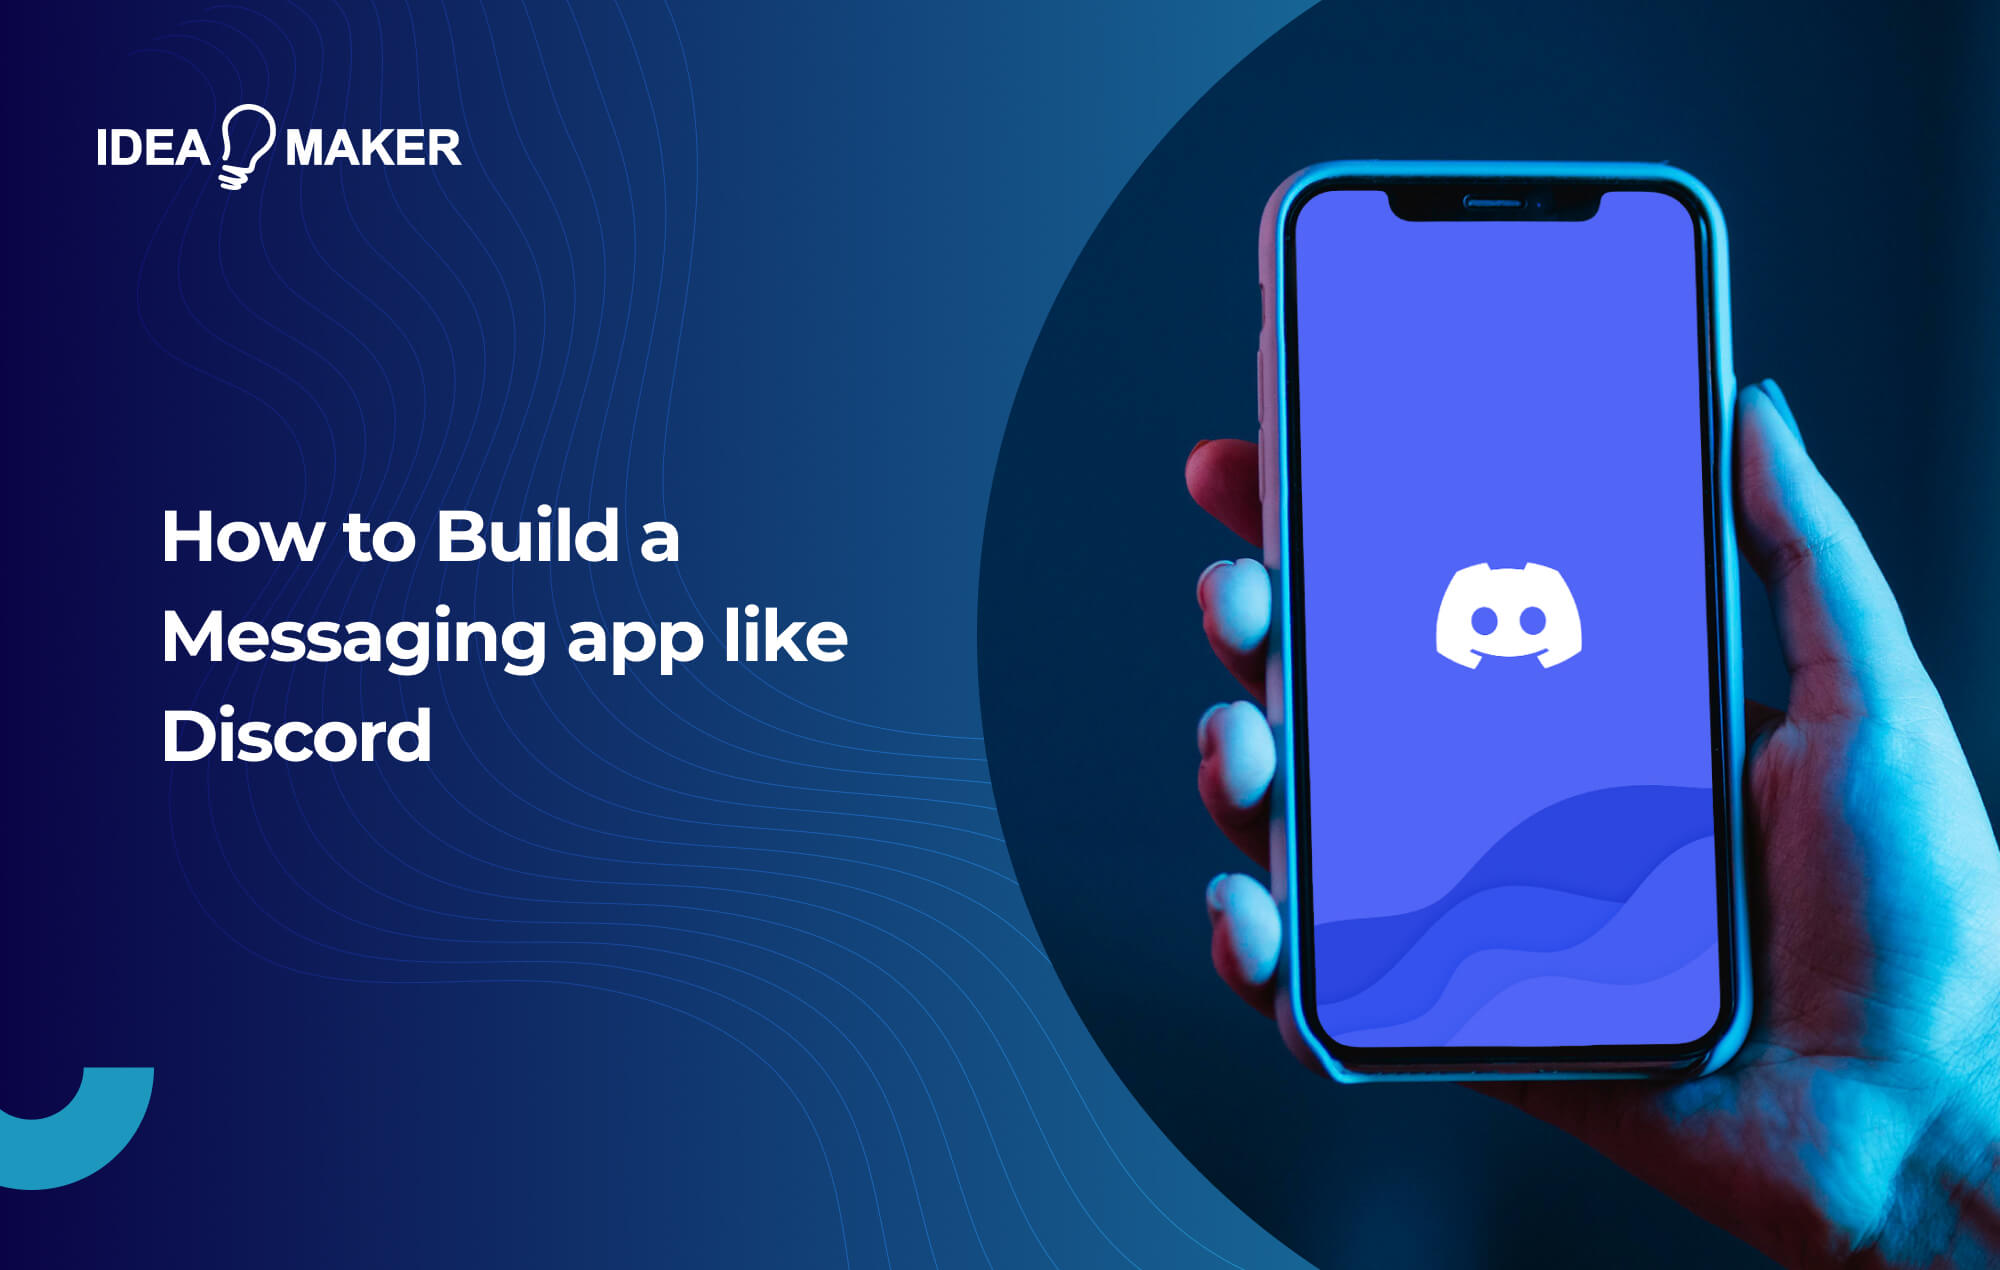 How to Build a Messaging app like Discord